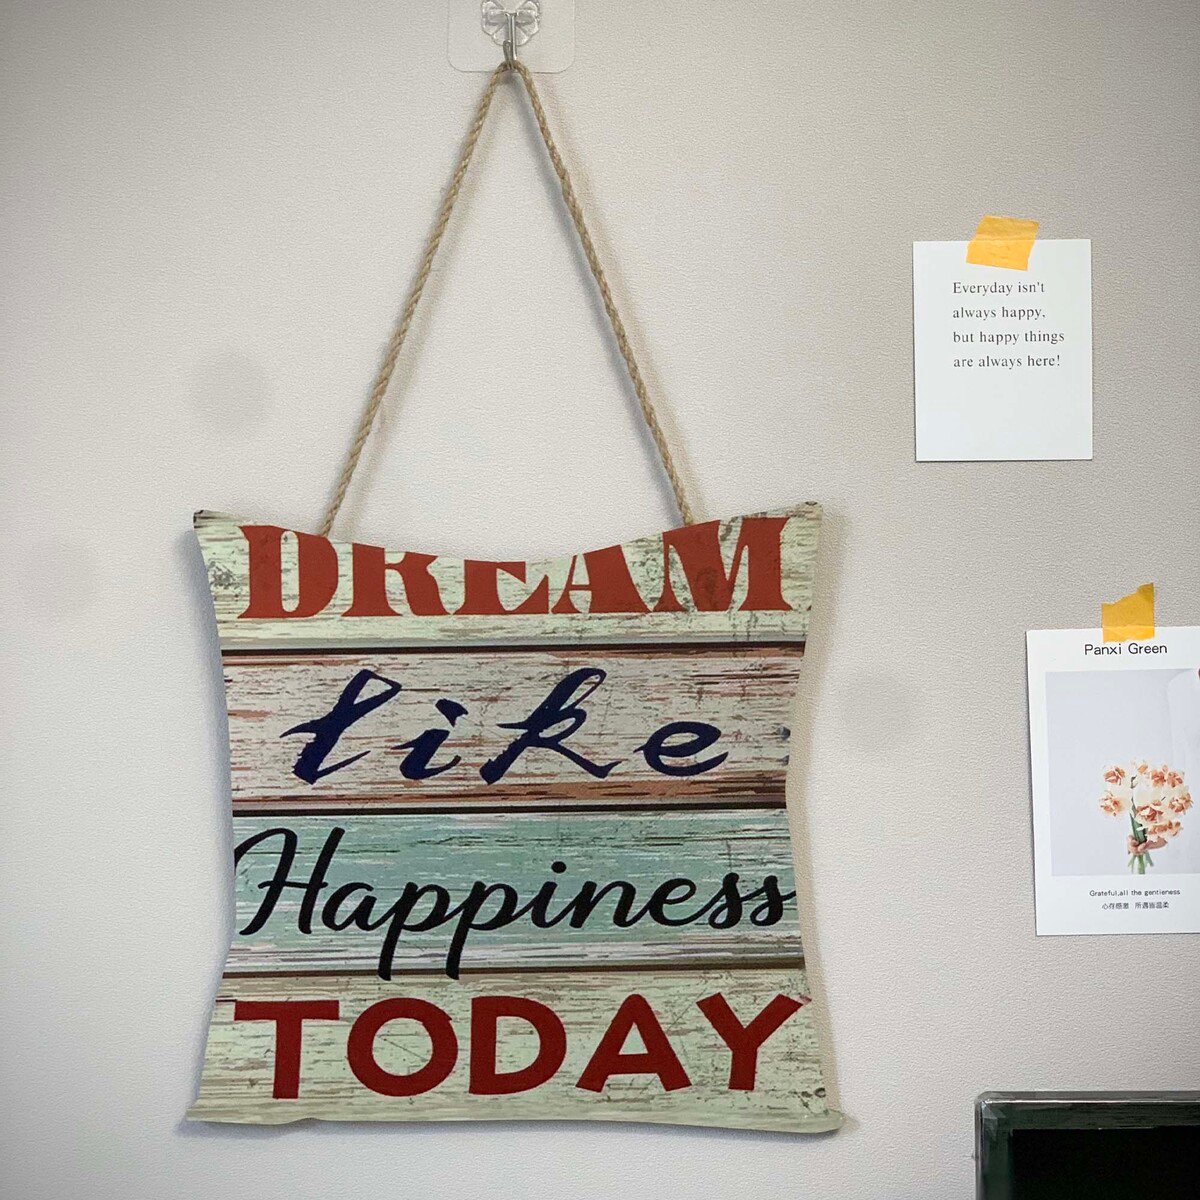 Maple Leaf Dream Like Happiness Today Sign Wooden Pallet Wall Art Hanging Board, 30 x 28 cm, 20YX084